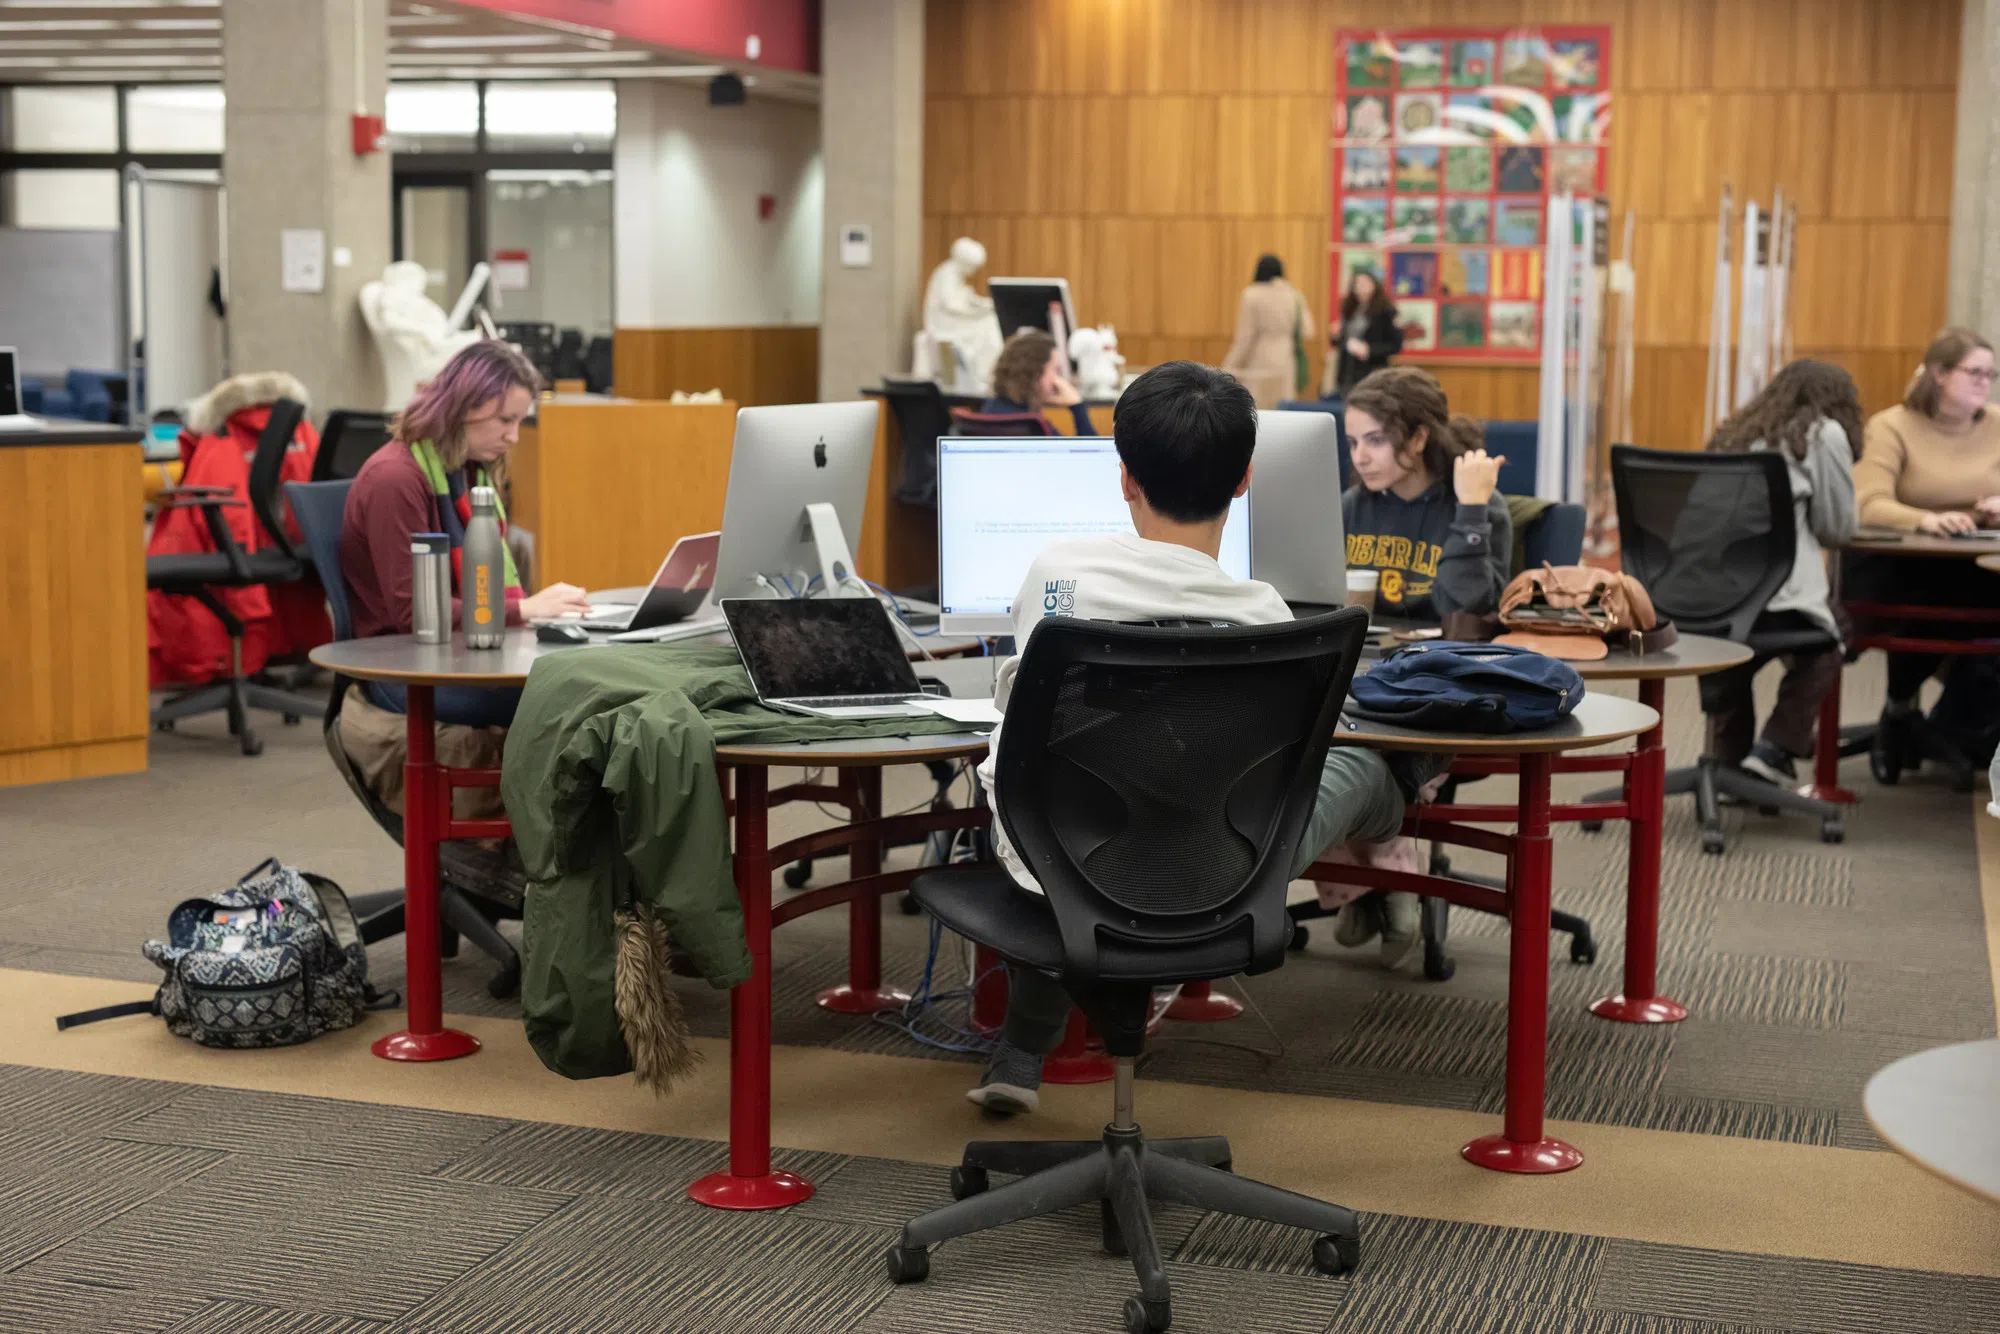 Three focused students sit in front of desktop computers working on assignments.